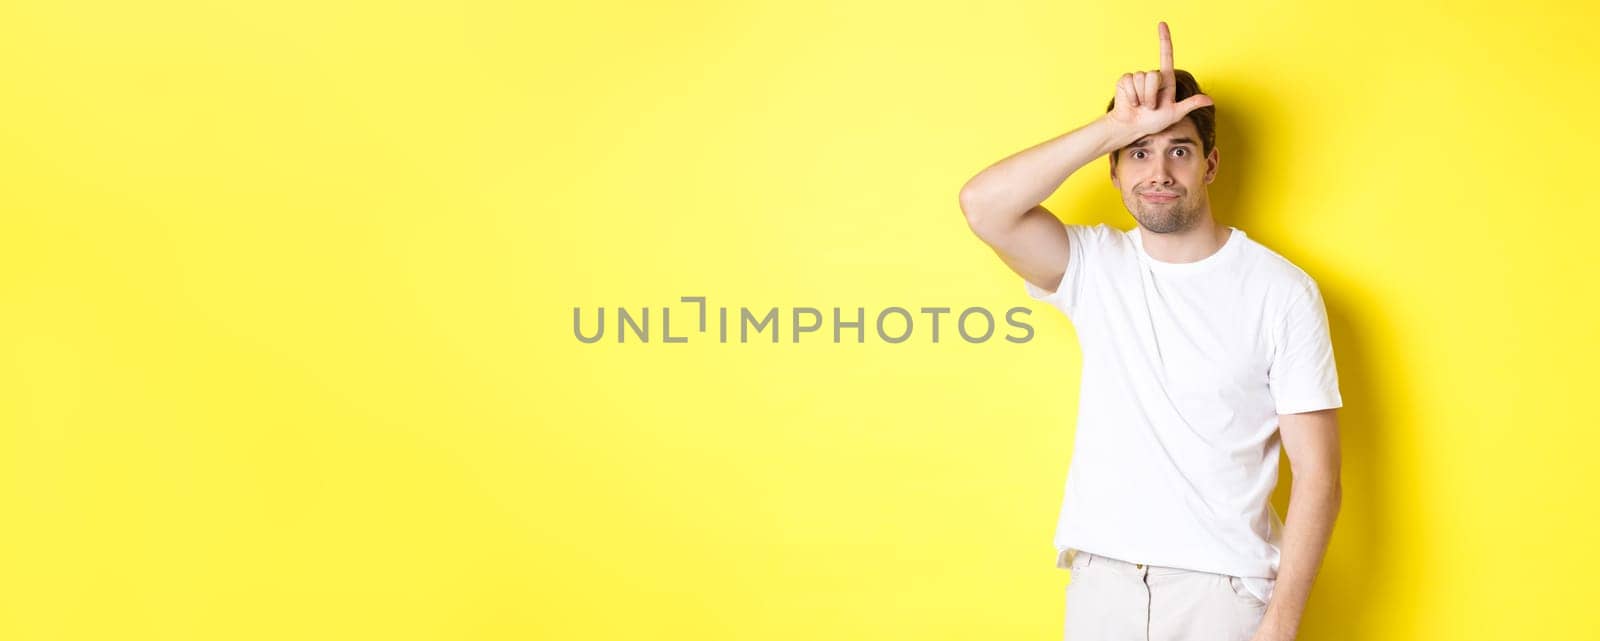 Awkward guy showing loser sign on forehead, looking sad and gloomy, standing in white t-shirt against yellow background.